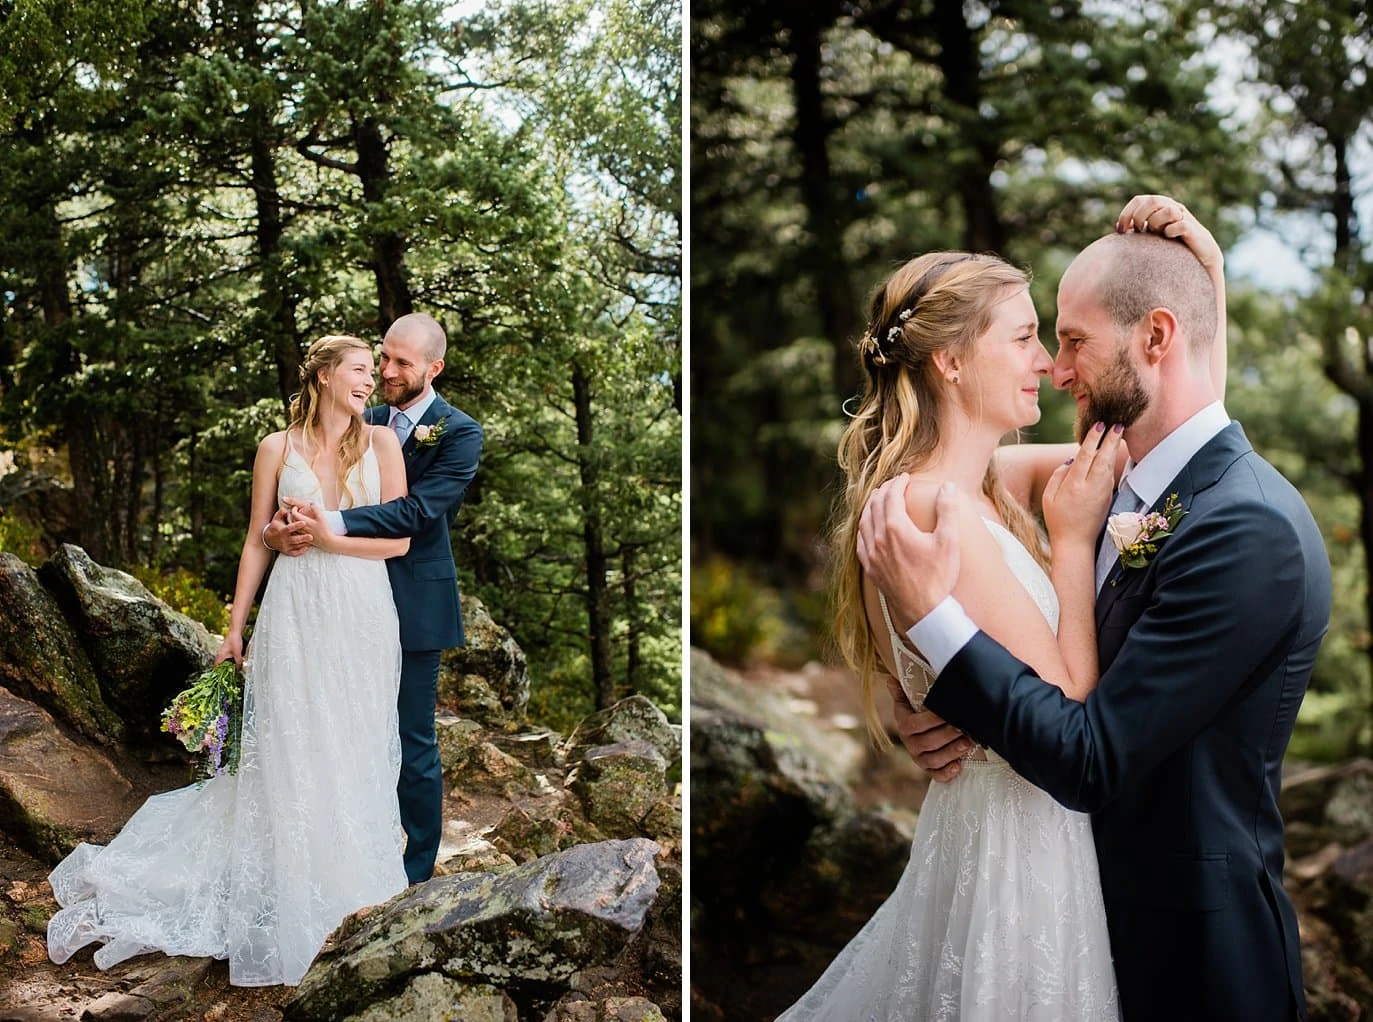 Romantic bride and groom in forest on Colorado wedding day